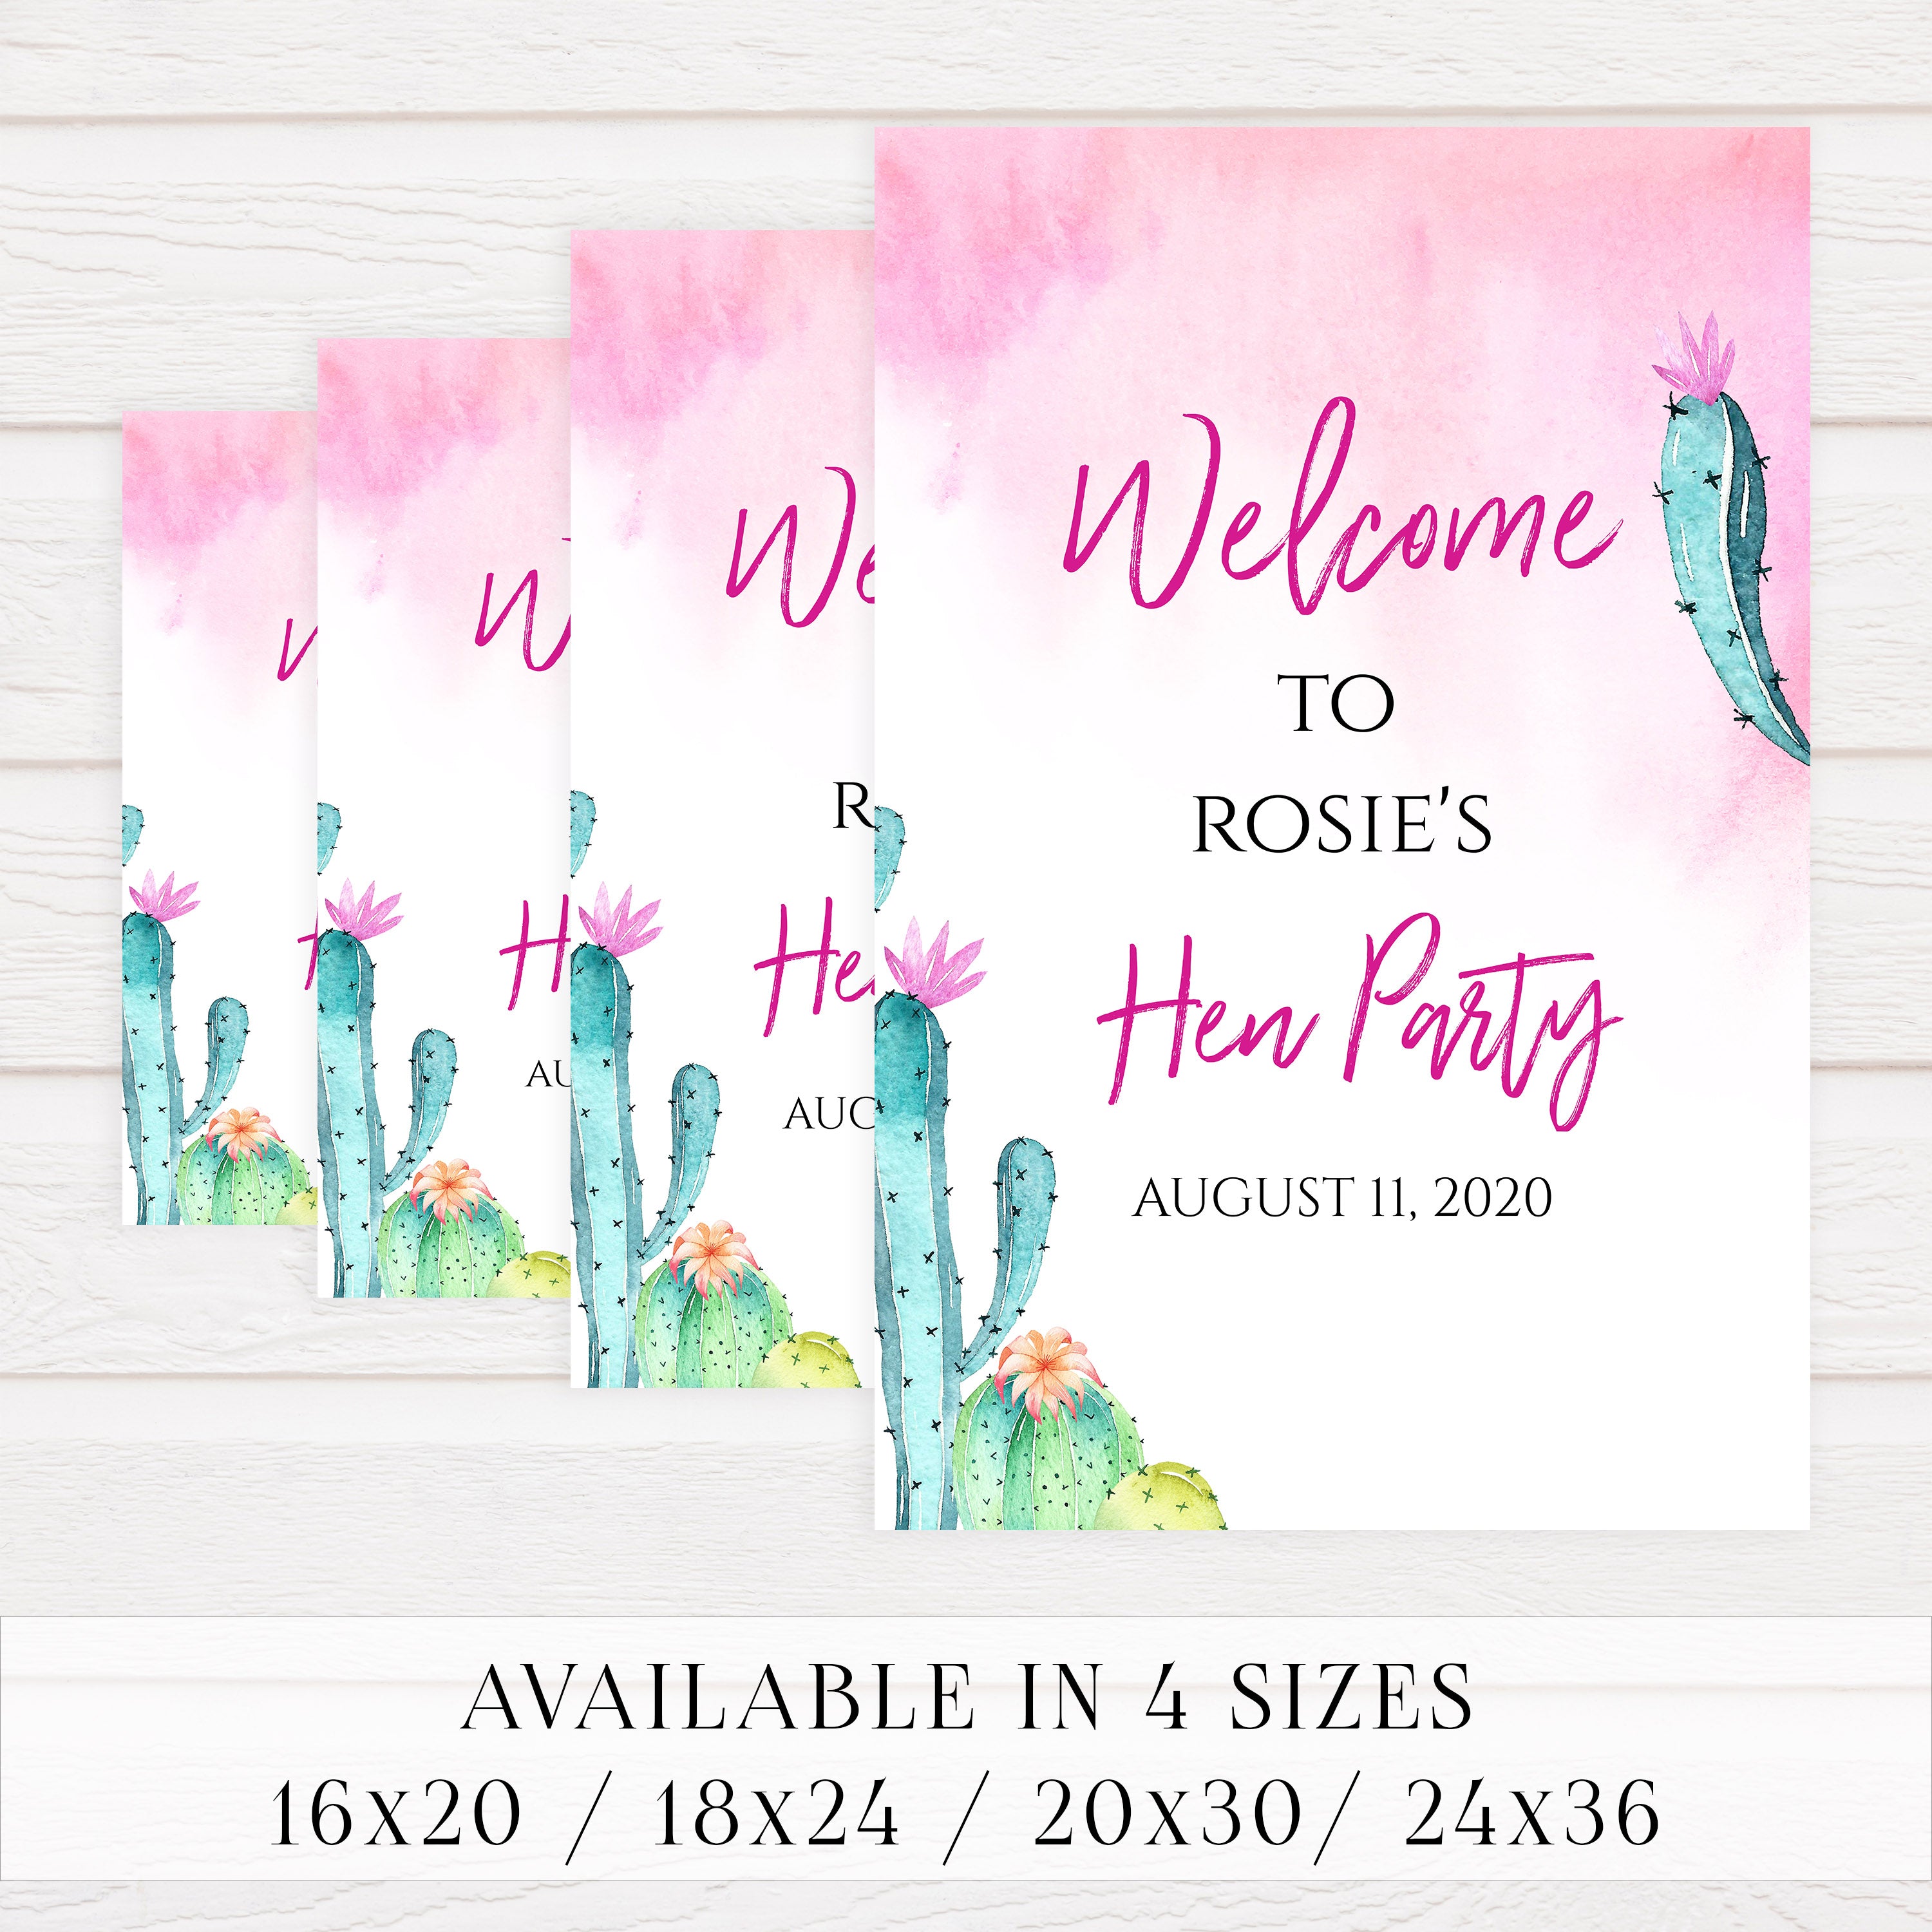 Final Fiesta Hen Party Welcome Sign, Editable PDF Template